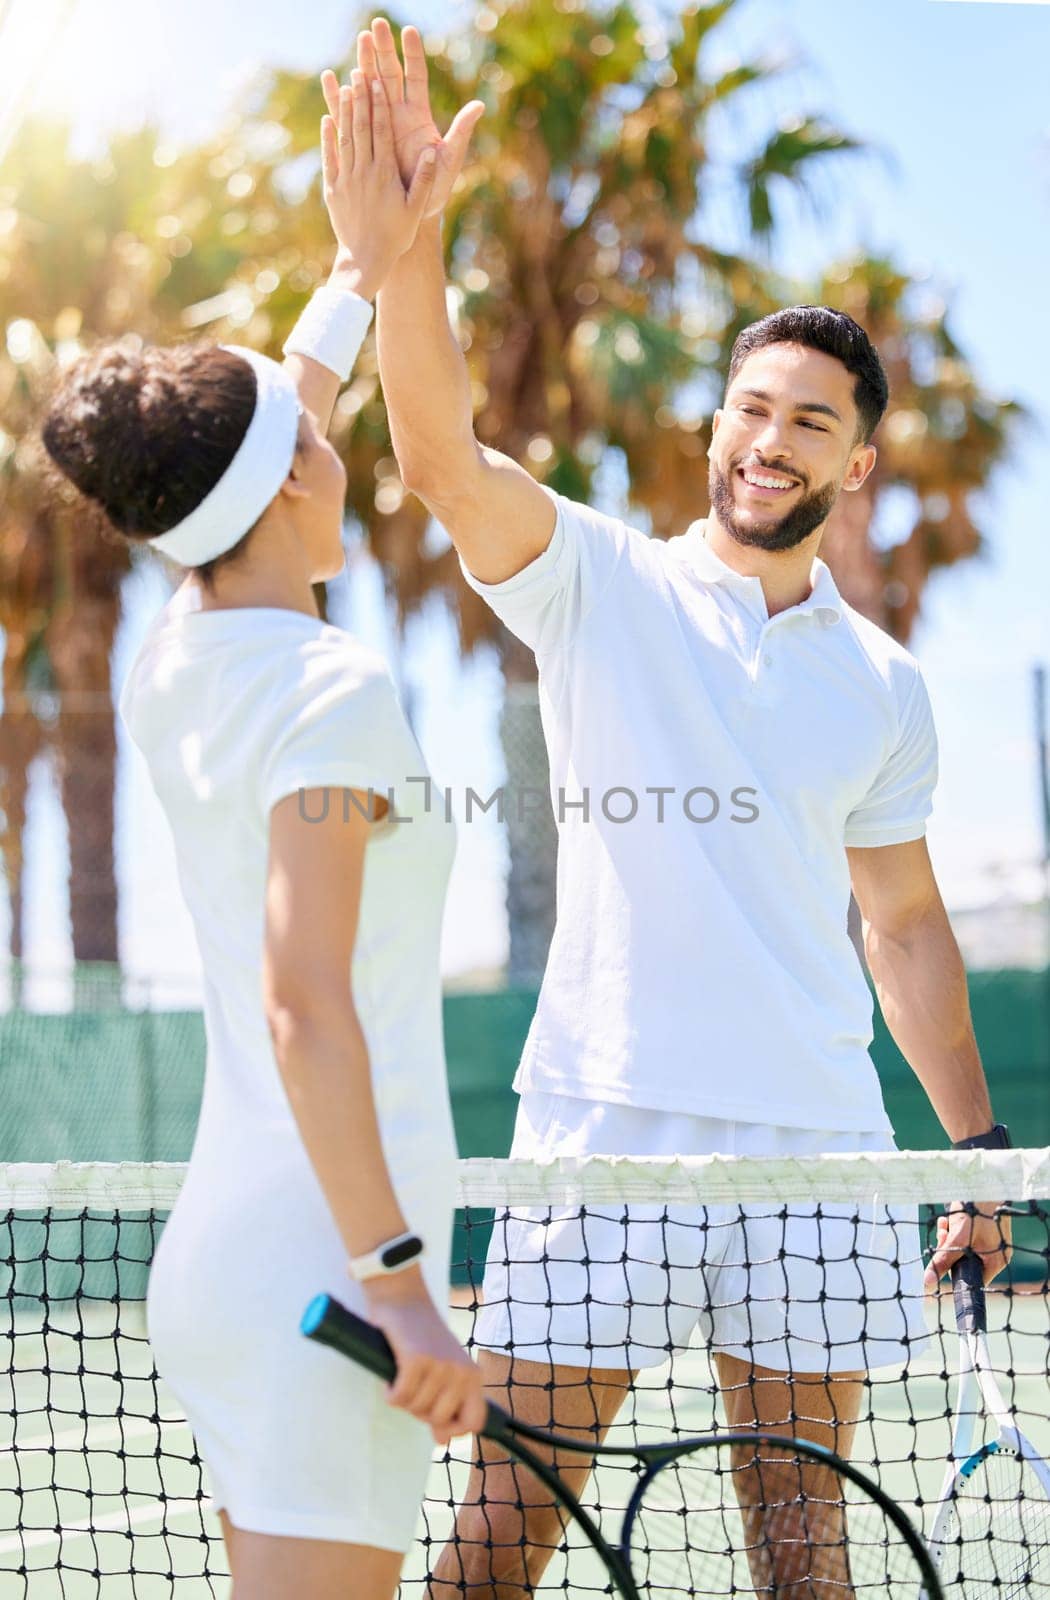 Tennis, friends and high five for sports game, exercise or workout together on the tennis court. Man and woman tennis player touch hands with smile in sport fitness for fun friendly match outdoors.